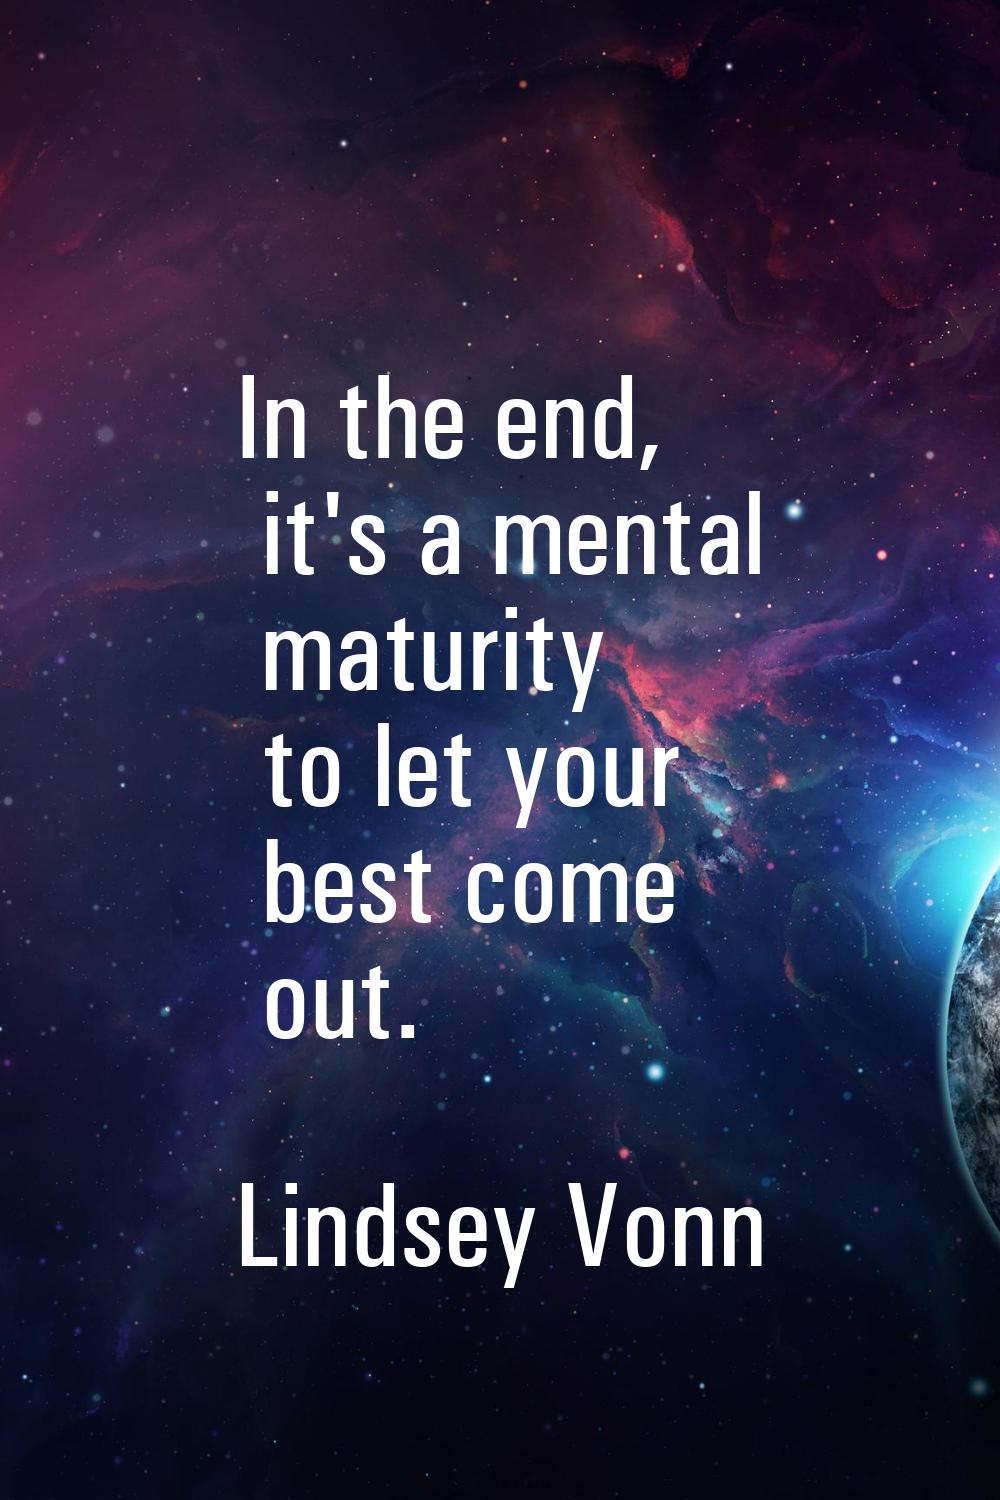 In the end, it's a mental maturity to let your best come out.